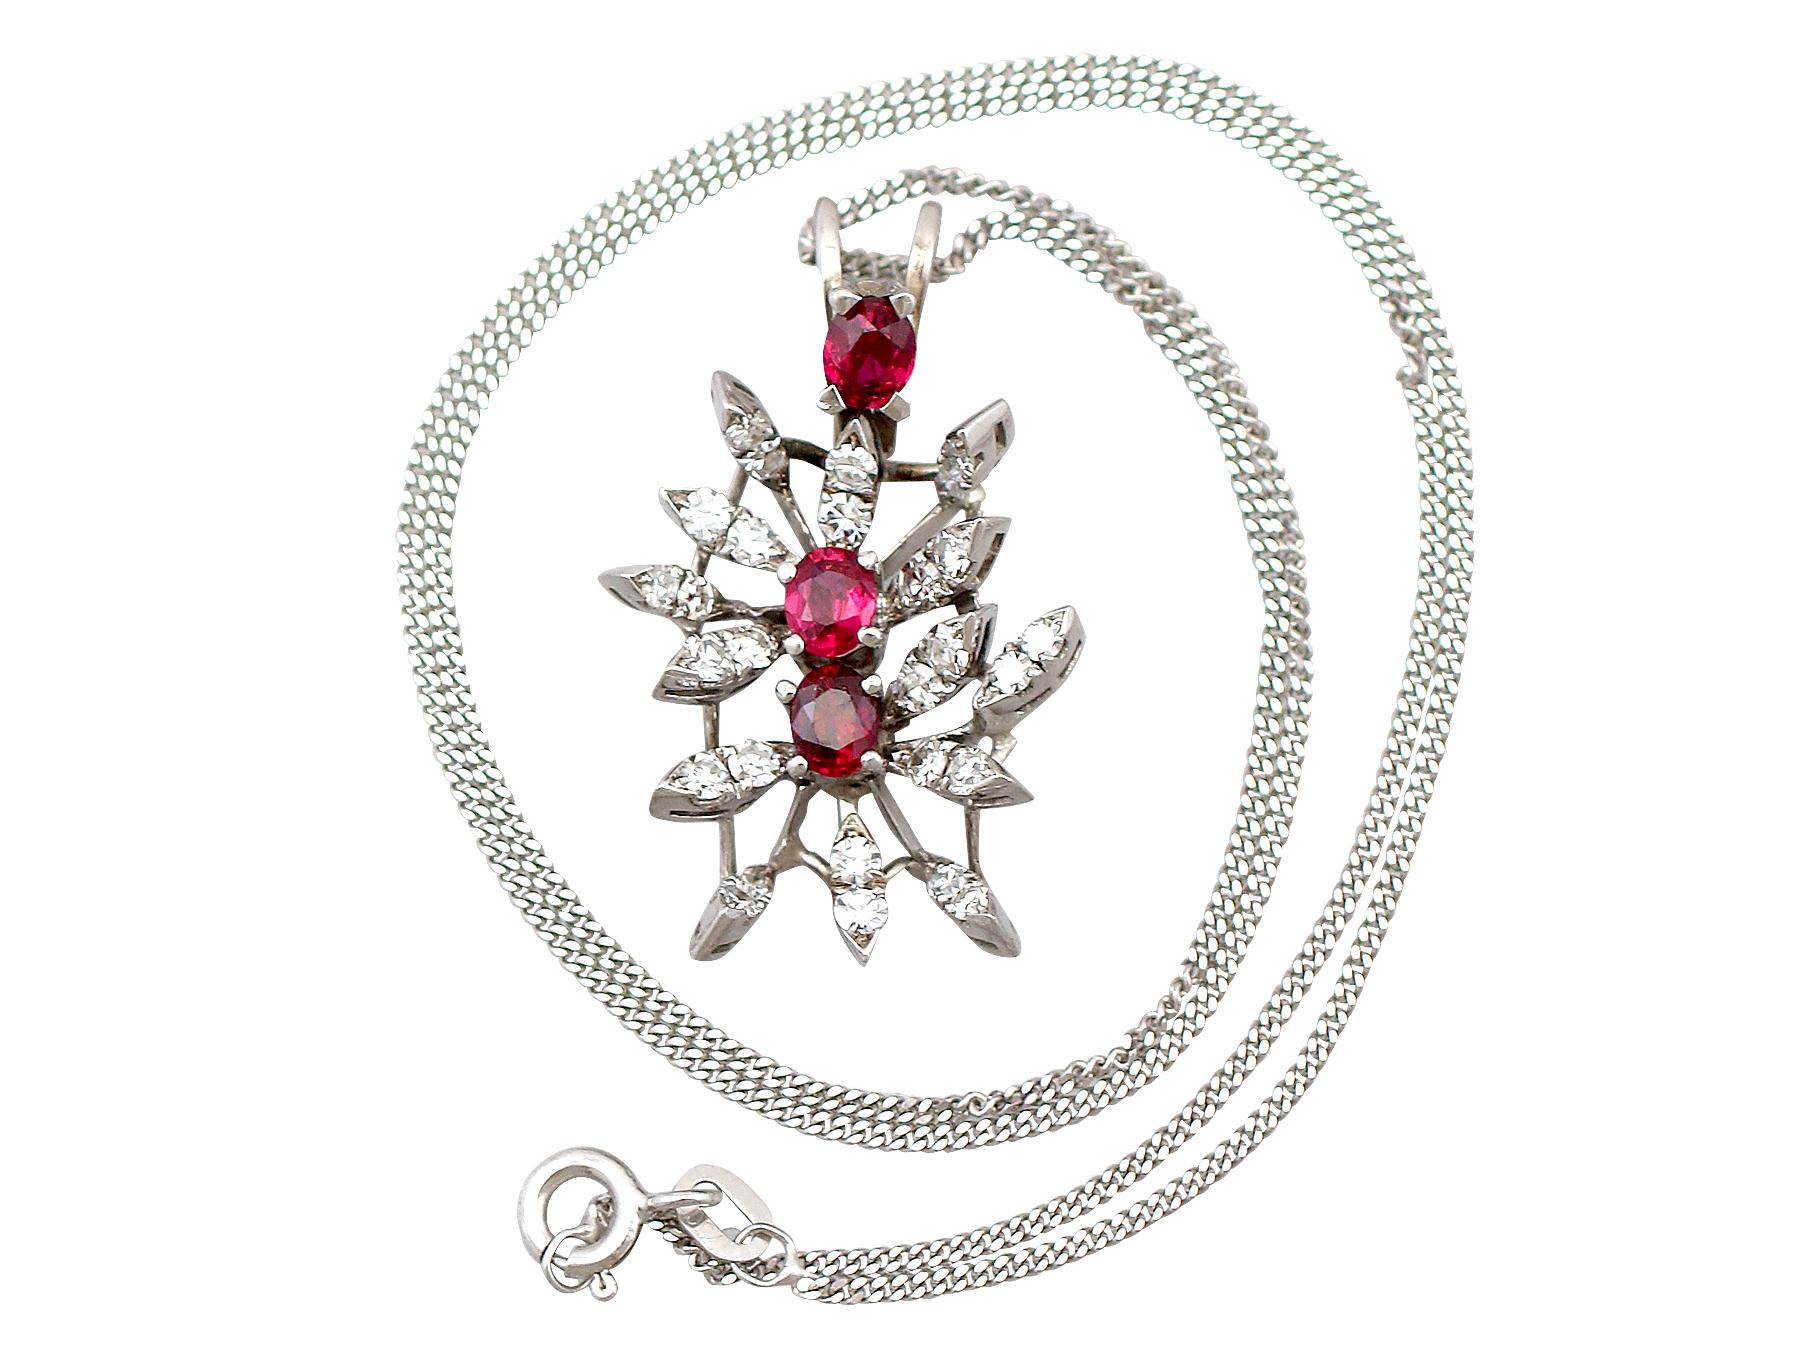 A fine and impressive vintage 0.88 carat ruby and 0.69 carat diamond, 18 karat white gold pendant; part of our diverse vintage jewelry collections.

This fine and impressive ruby and diamond pendant has been crafted in 18k white gold.

The pierced